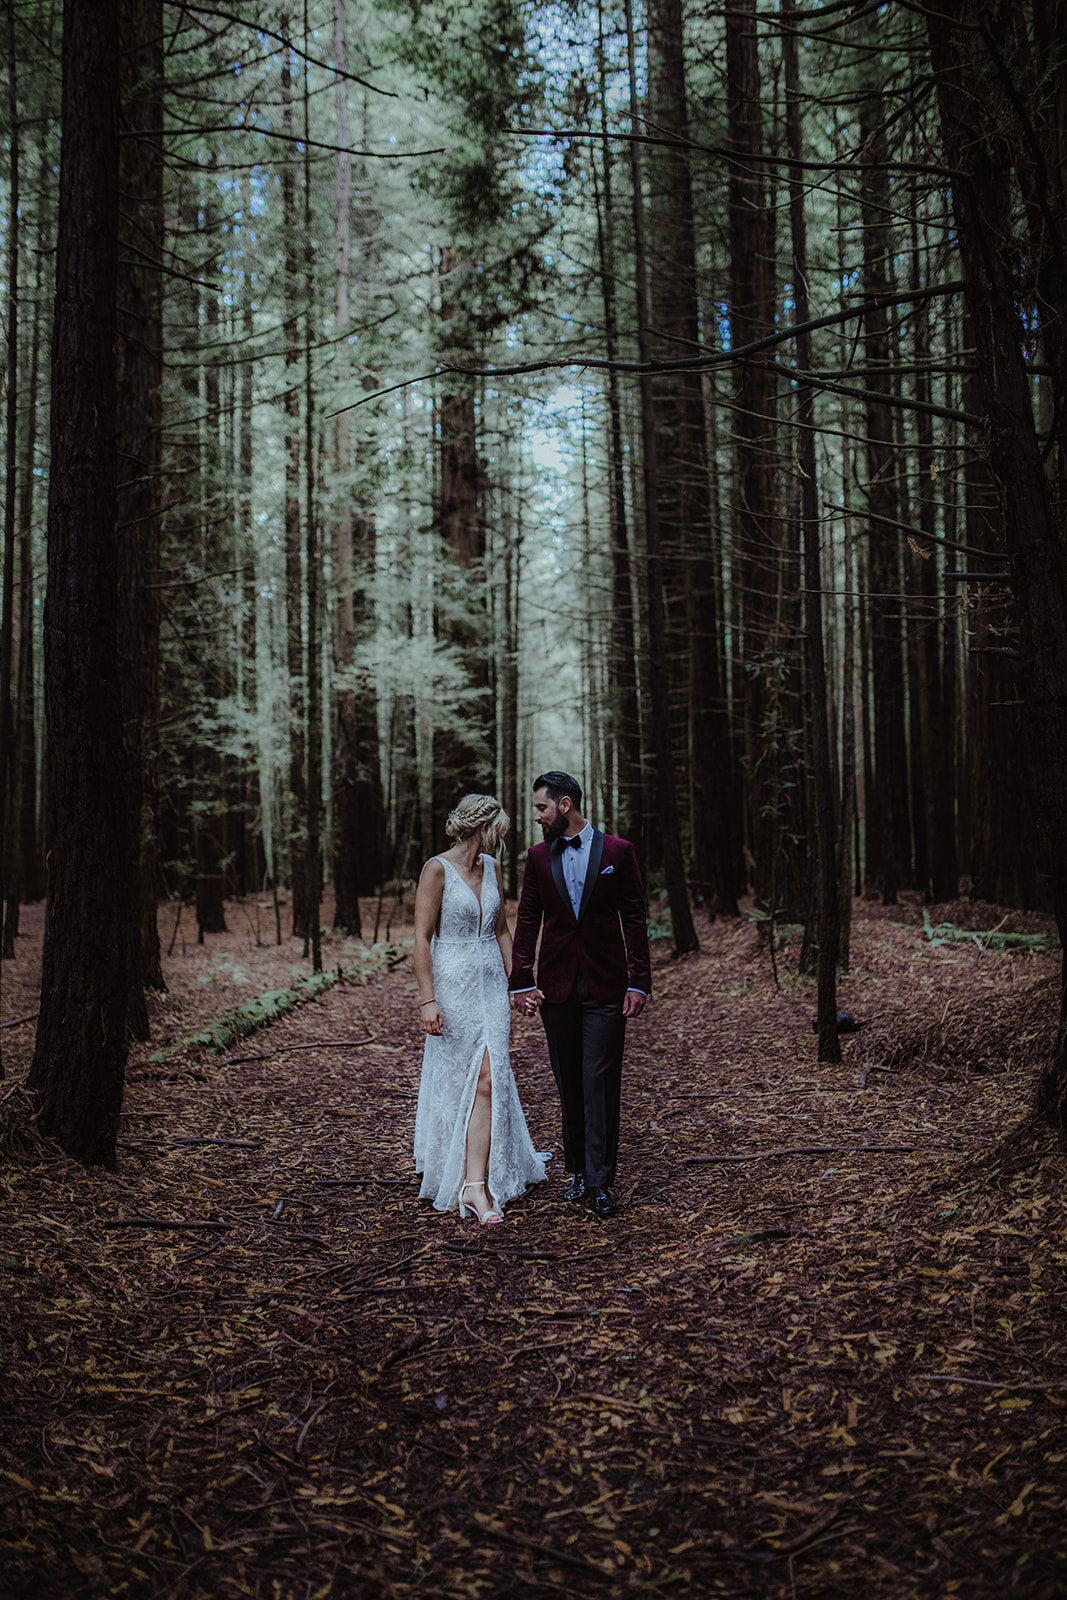  A bride and groom's first look photograph at their wedding